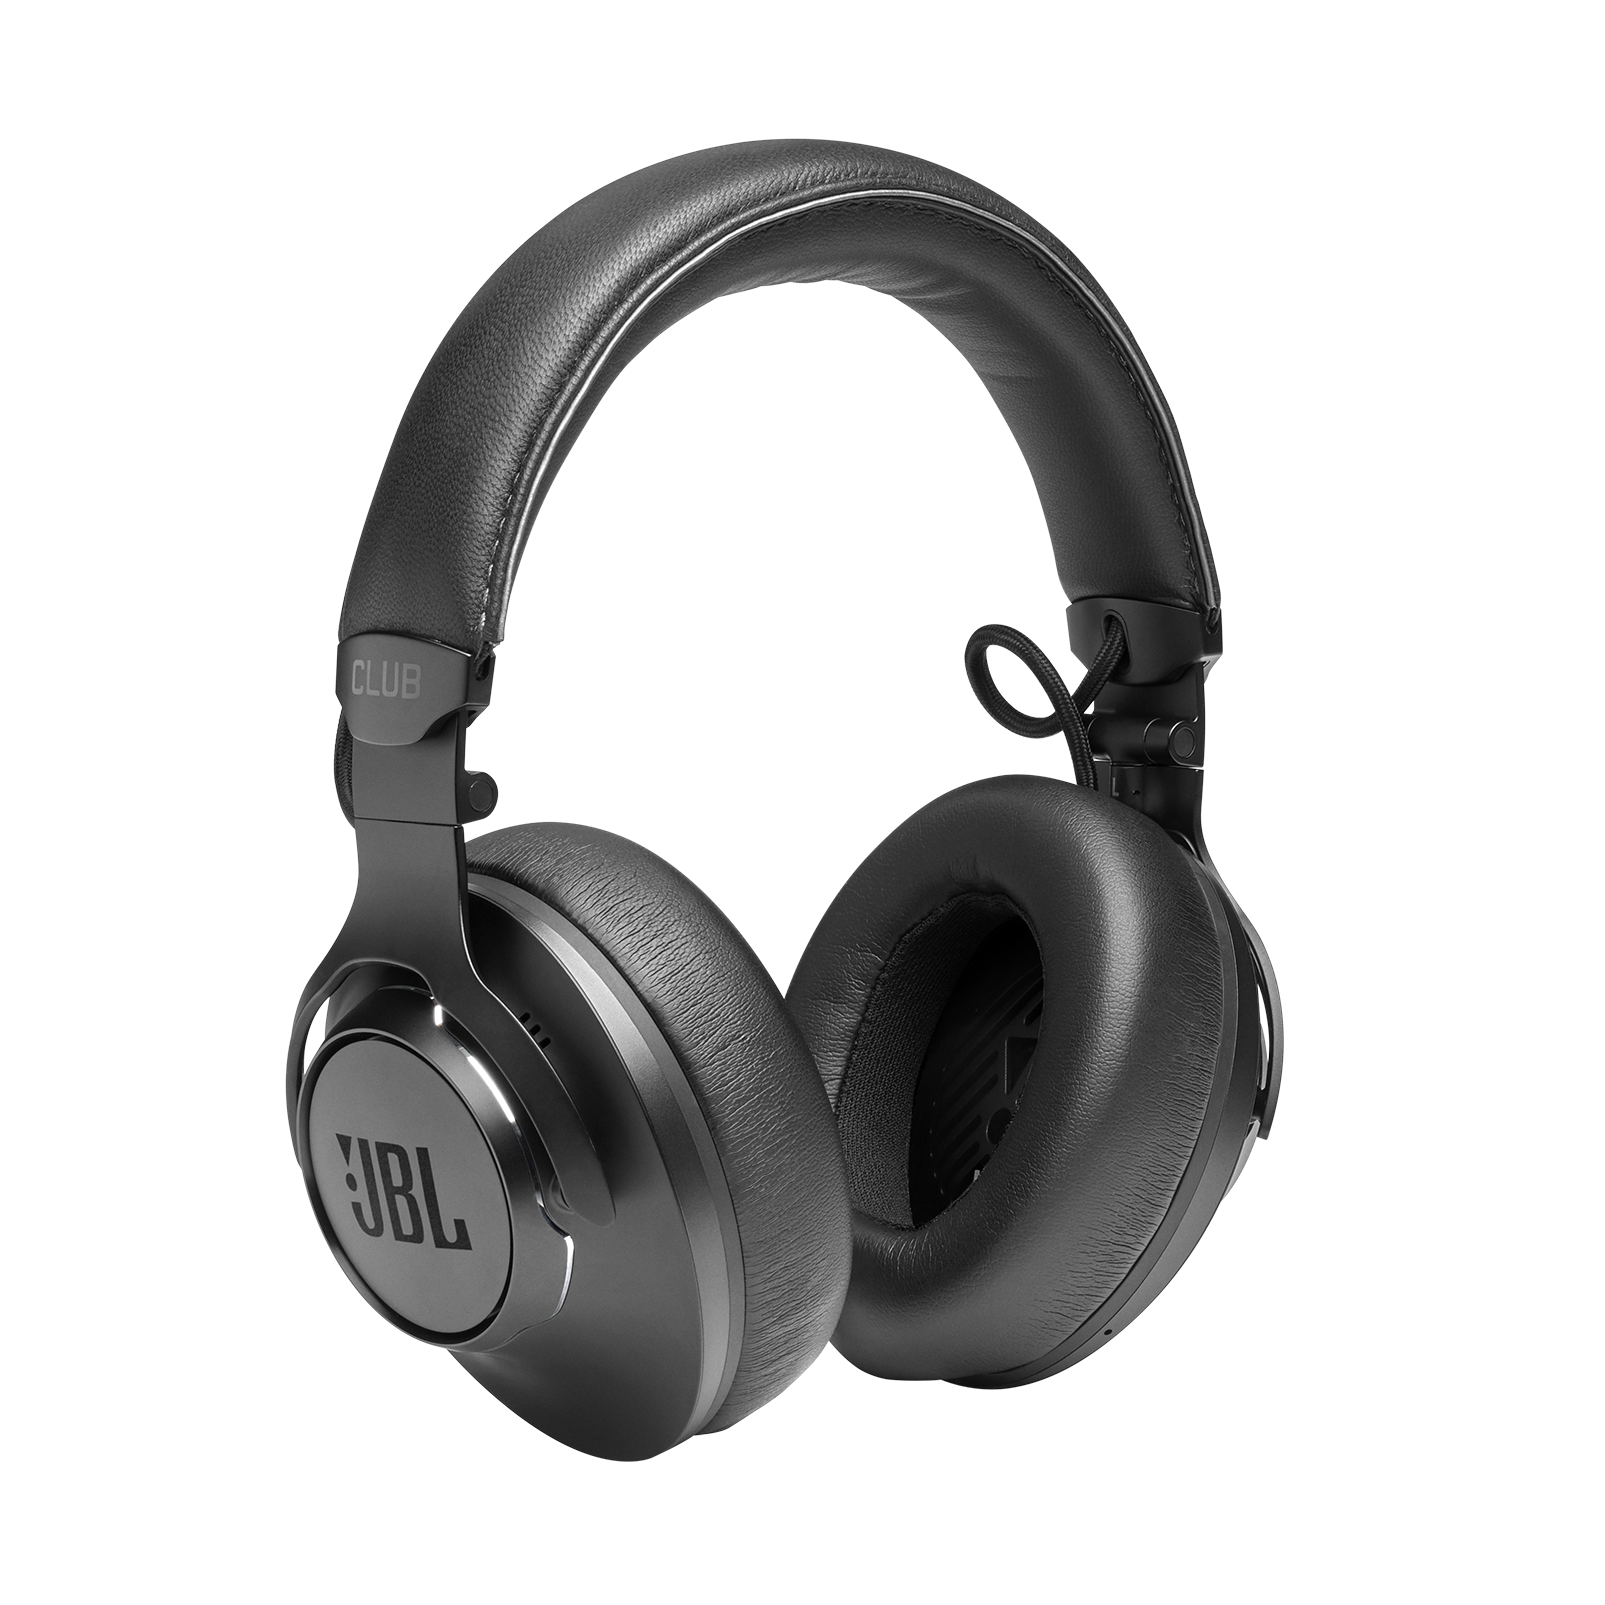 JBL CLUB ONE - Black - Wireless, over-ear, True Adaptive Noise Cancelling headphones inspired by pro musicians - Detailshot 6